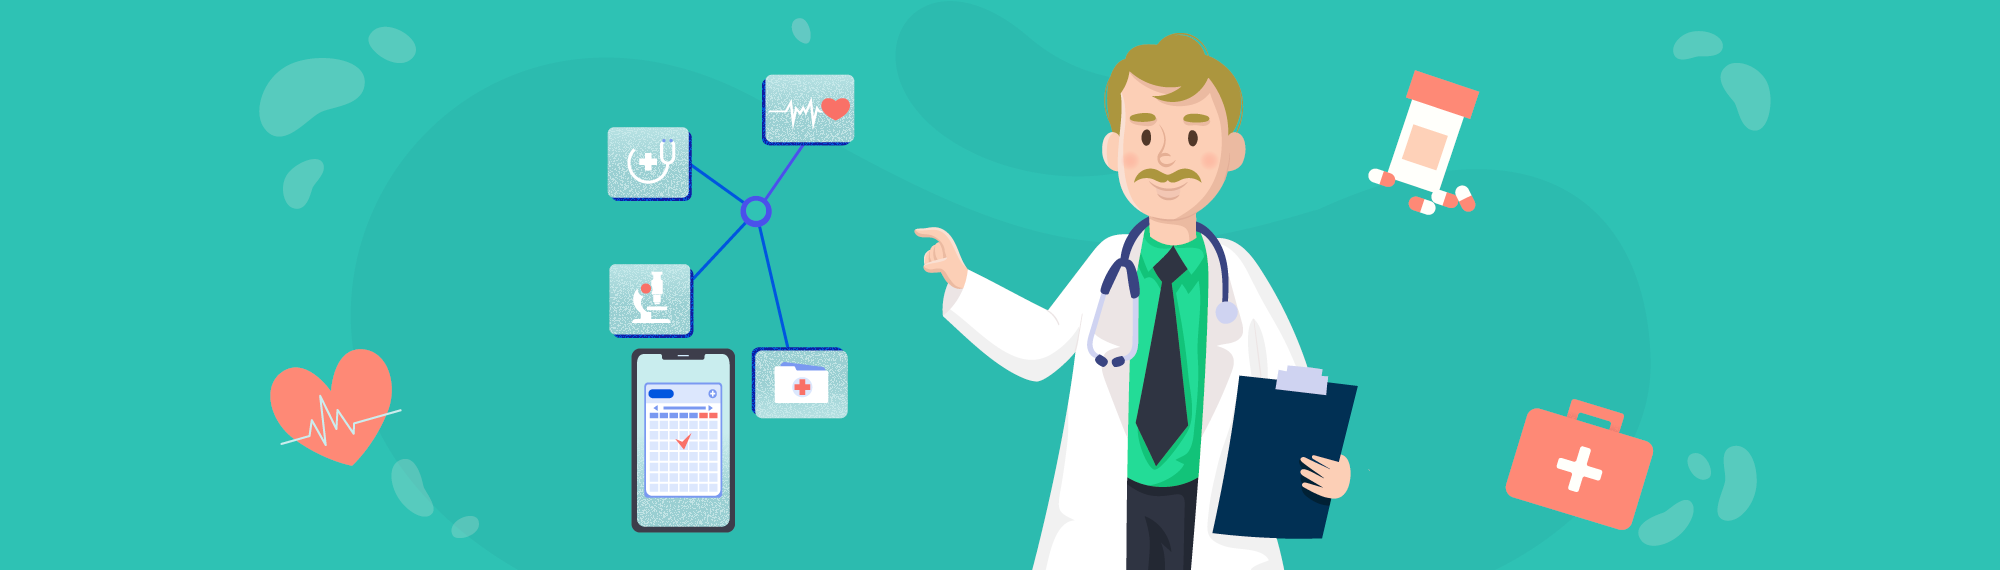 A doctor with a stethoscope around his neck and a clipboard in his hand points his finger at a smartphone showing a digital wellness app. In the background are elements related to medicine, like a medicine cabinet, a bottle of pills, and an illustration of a heart.